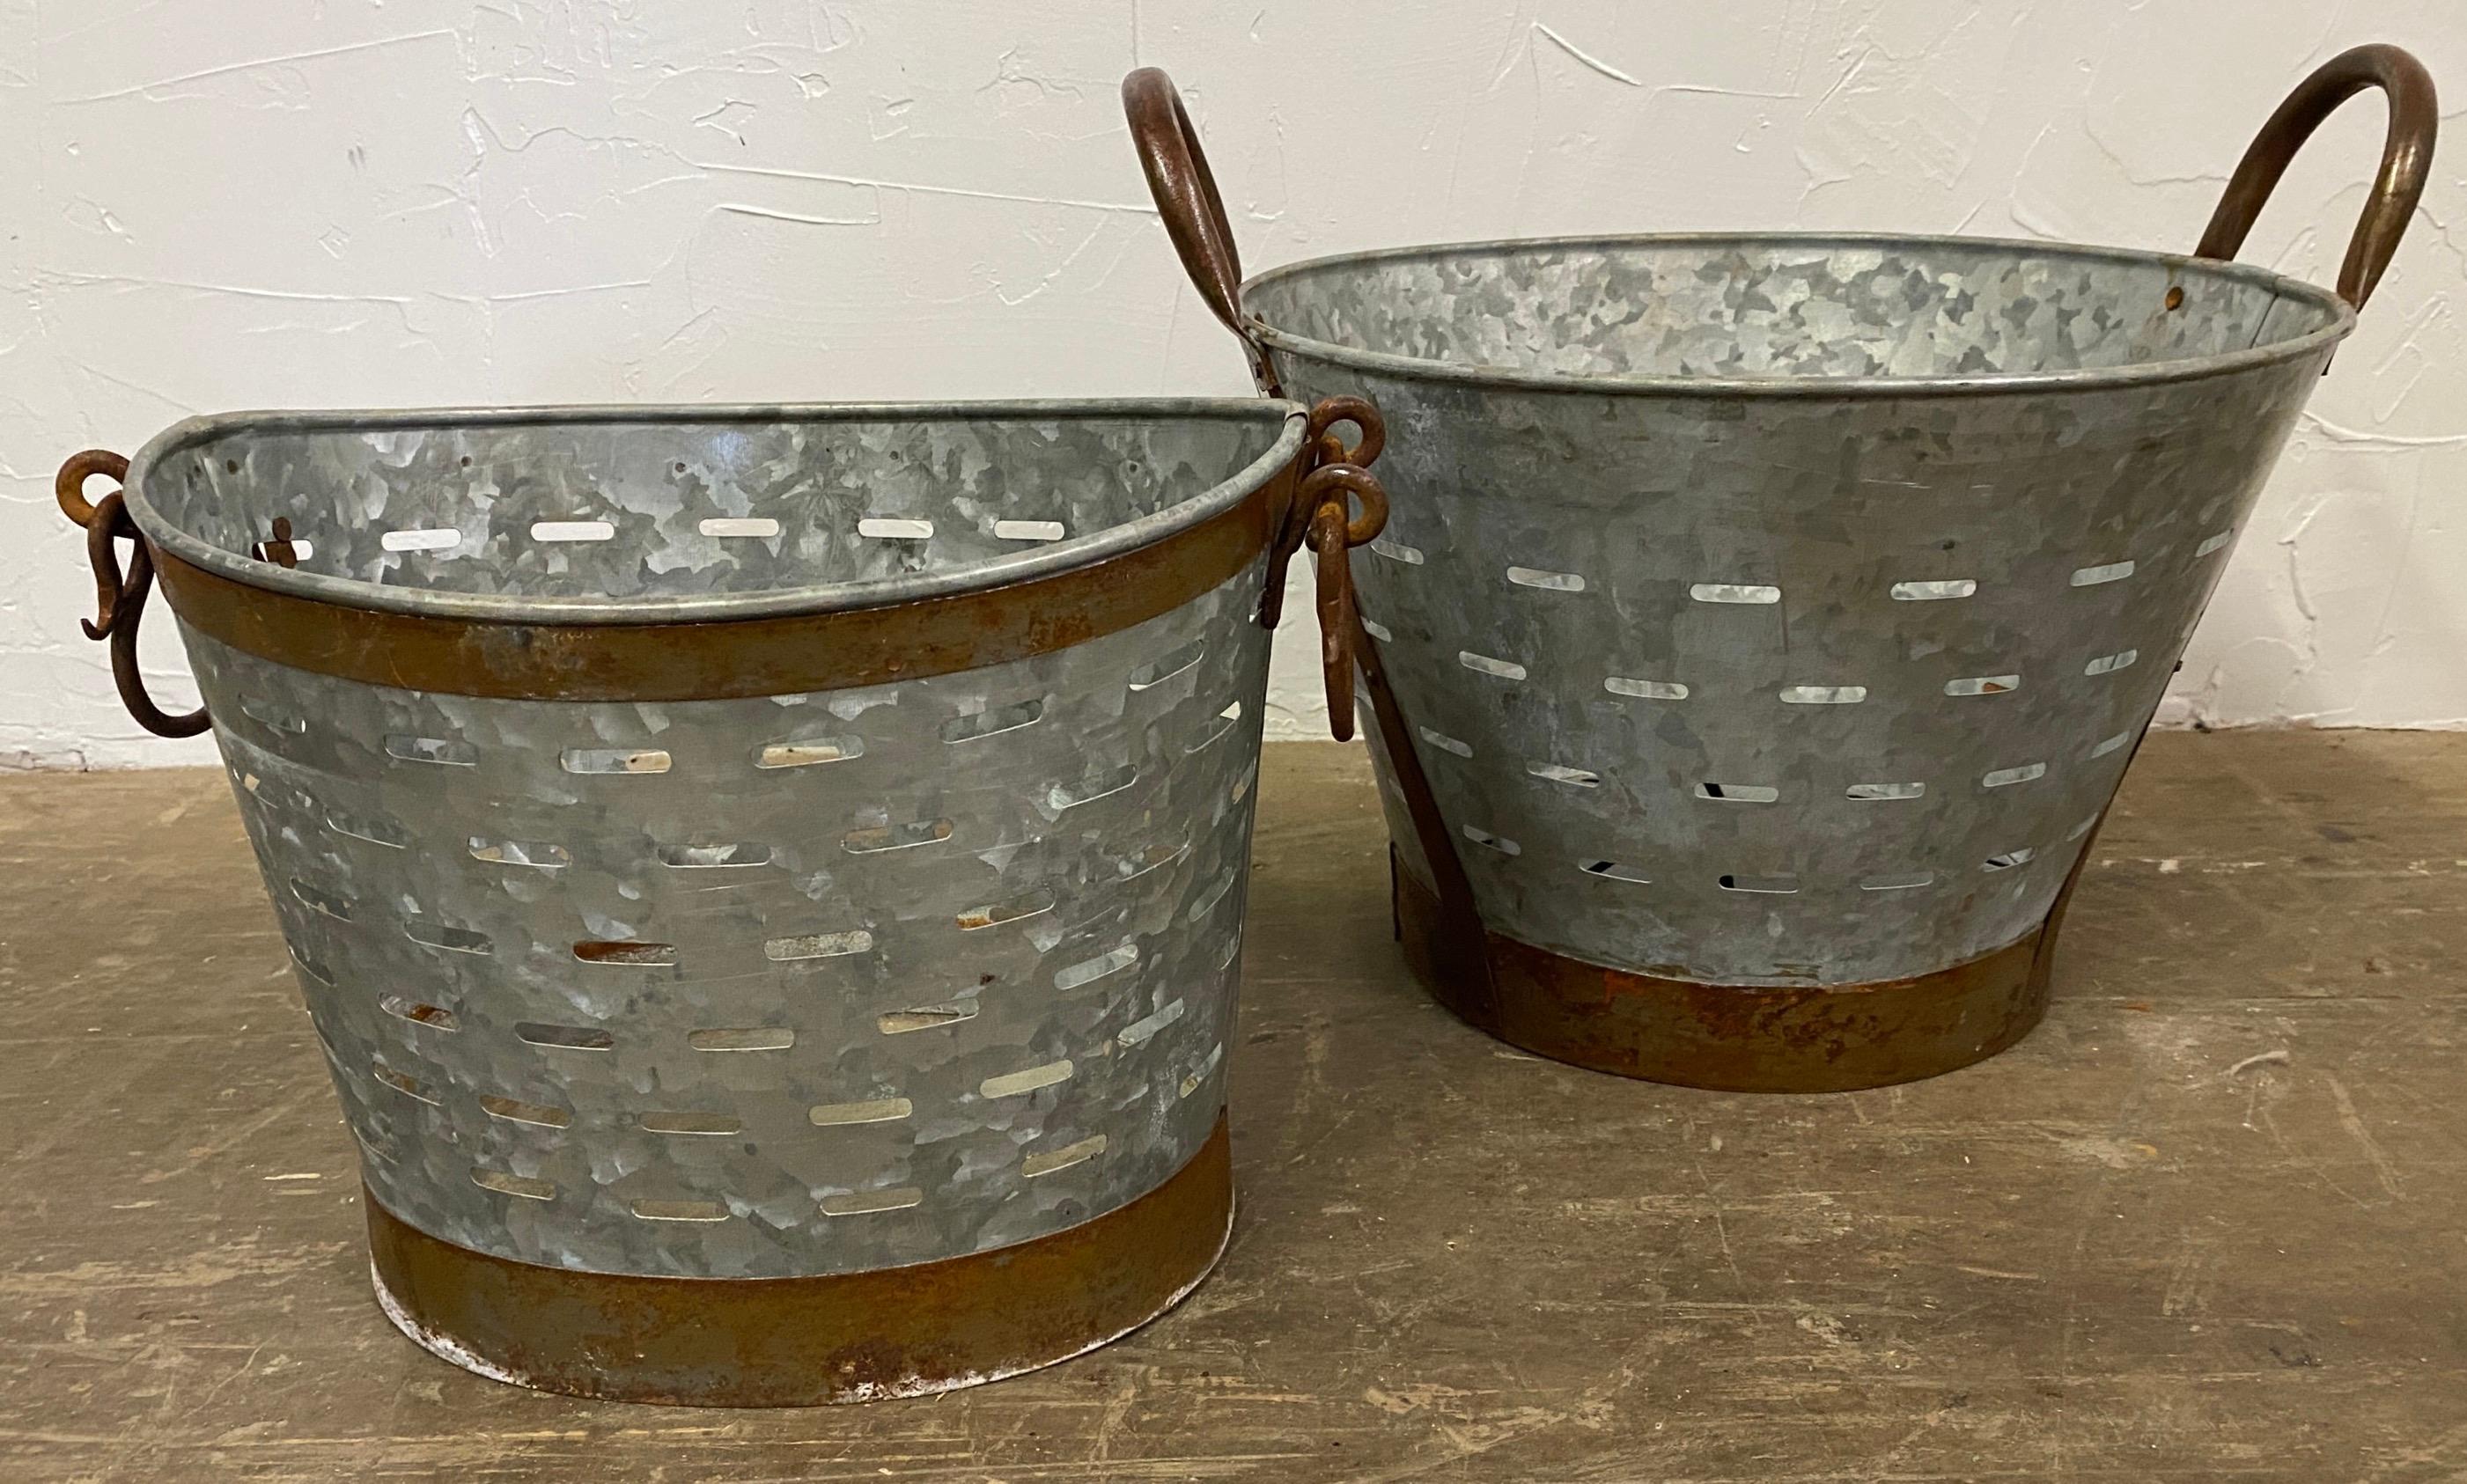 Vintage galvanized olive bucket or basket.  Use it for a waste basket, storage baskets, planters or a catch all.  Basket has wonderful copper tone bands giving it added interest and more decorative.   A second similar basket is available.  See photo